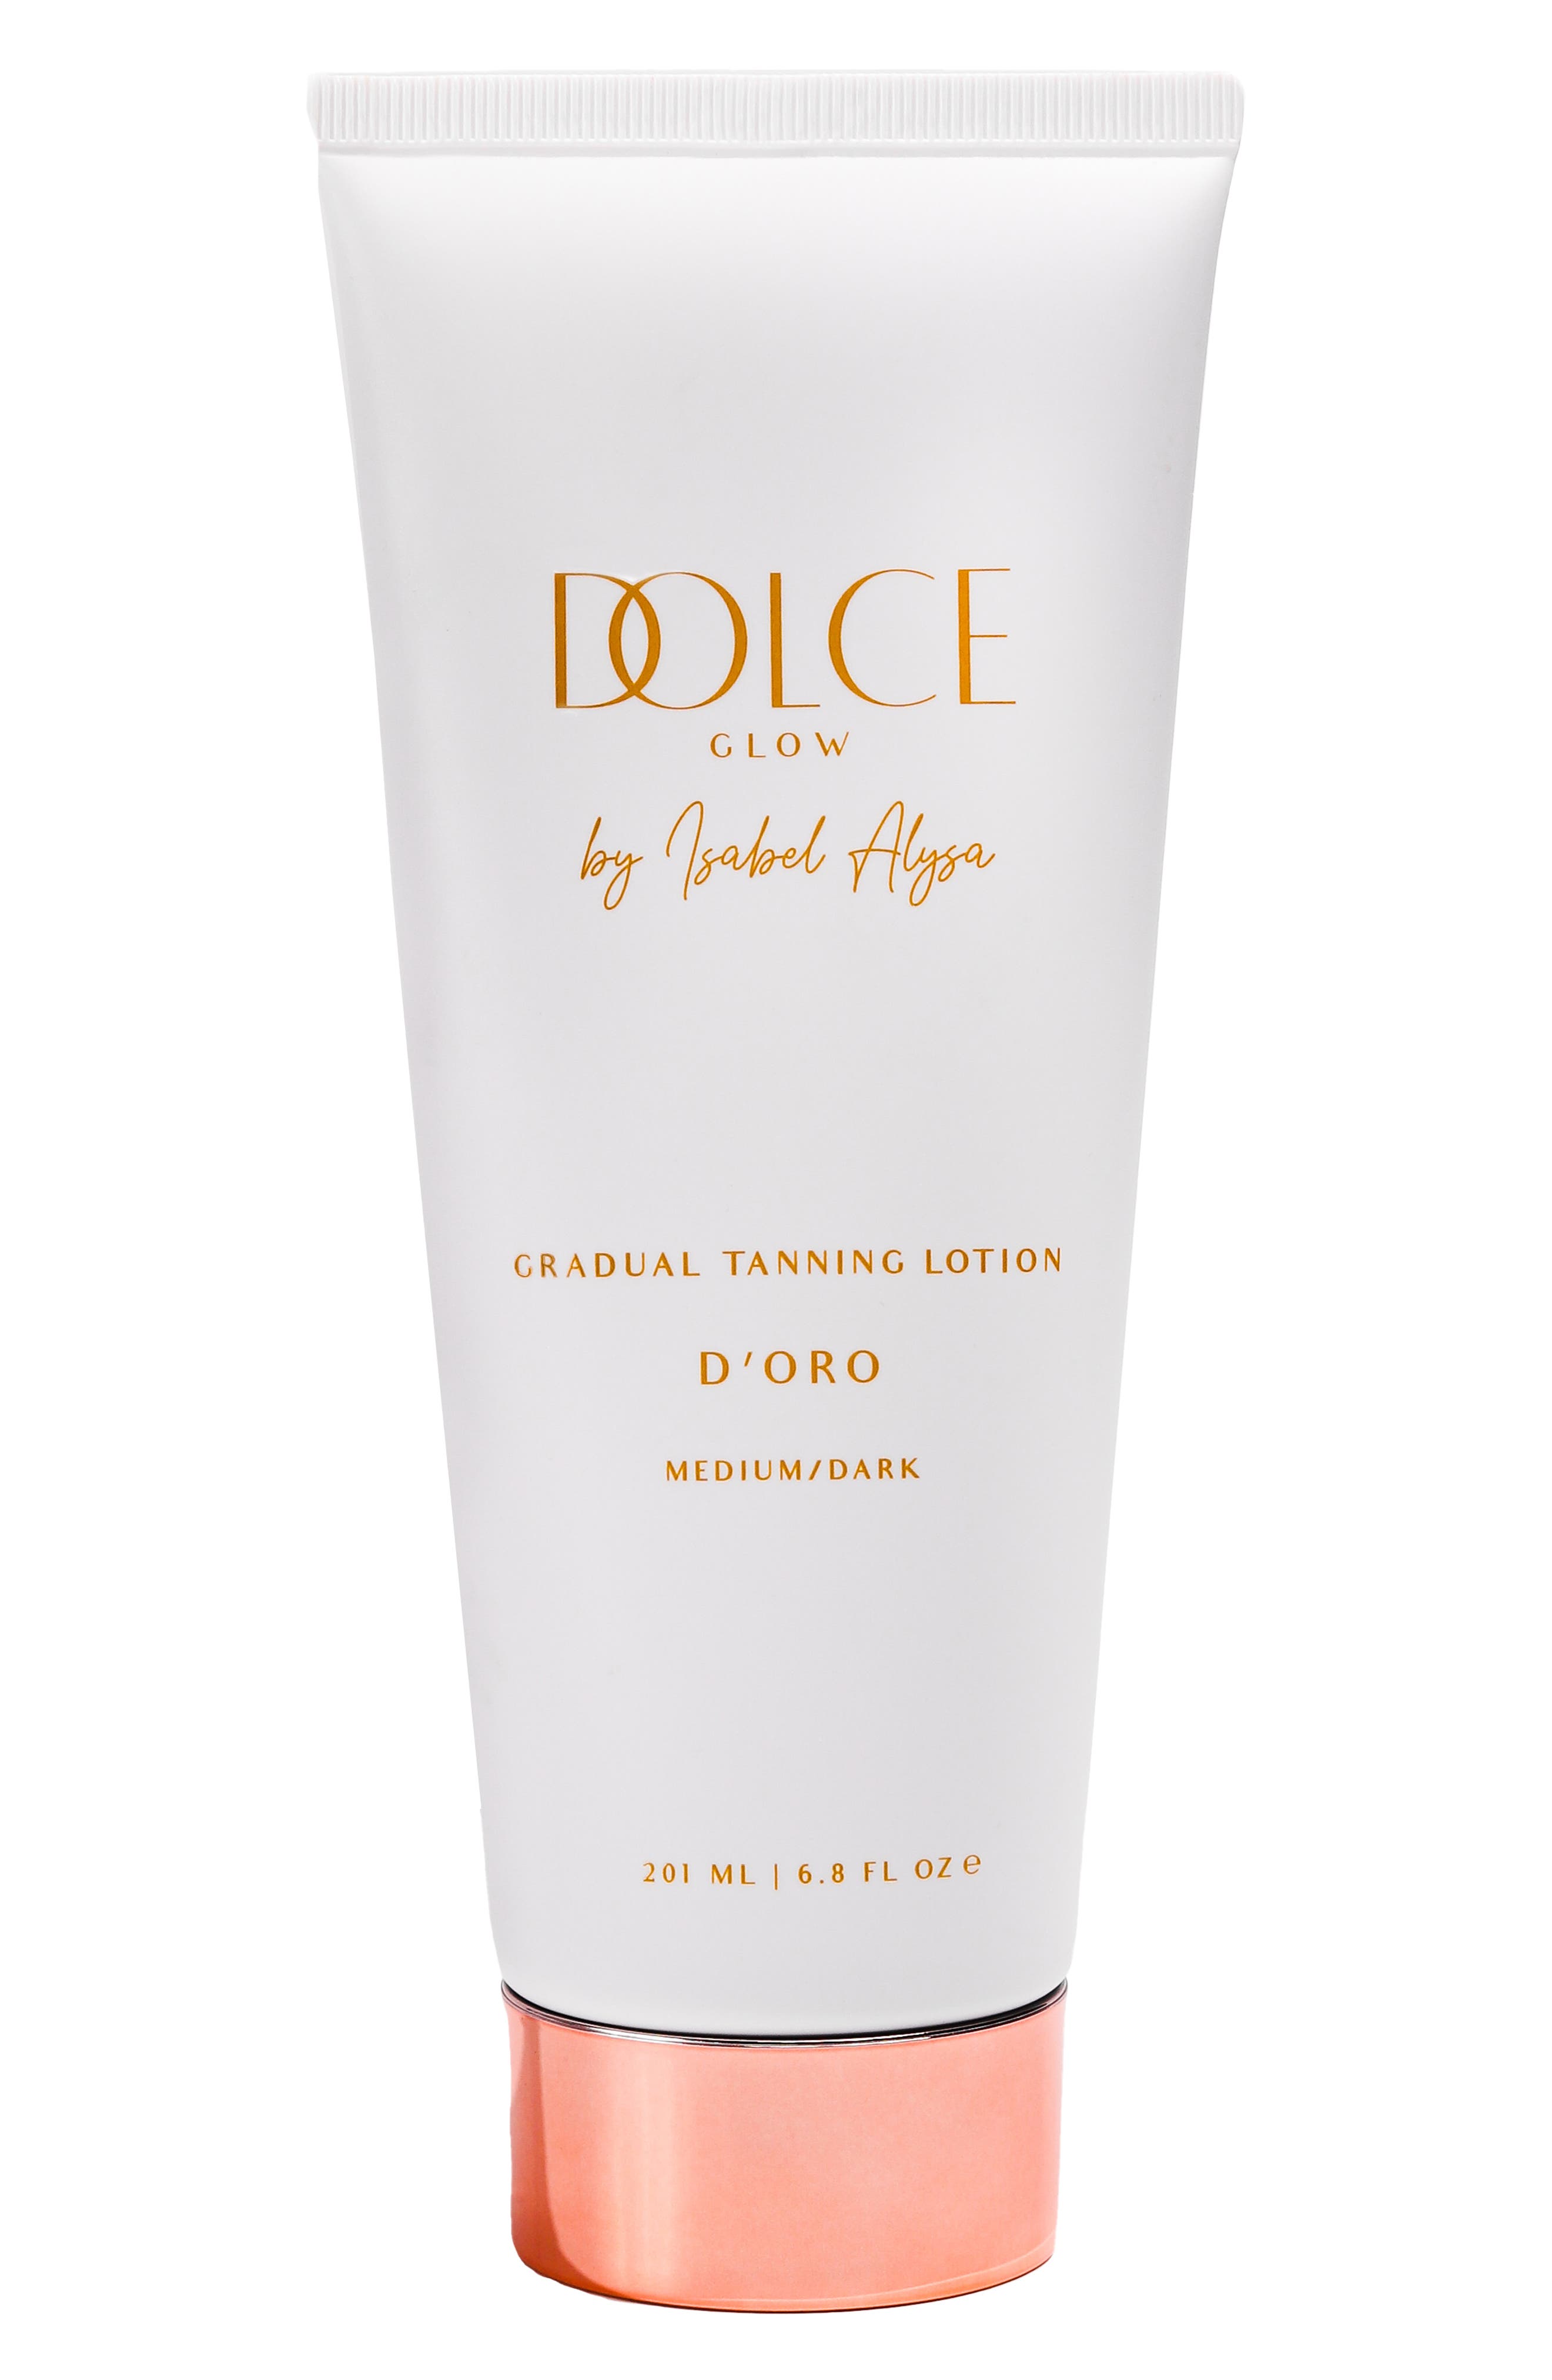 Dolce Glow by Isabel Alysa D'Oro Gradual Tanning Lotion in None at Nordstrom